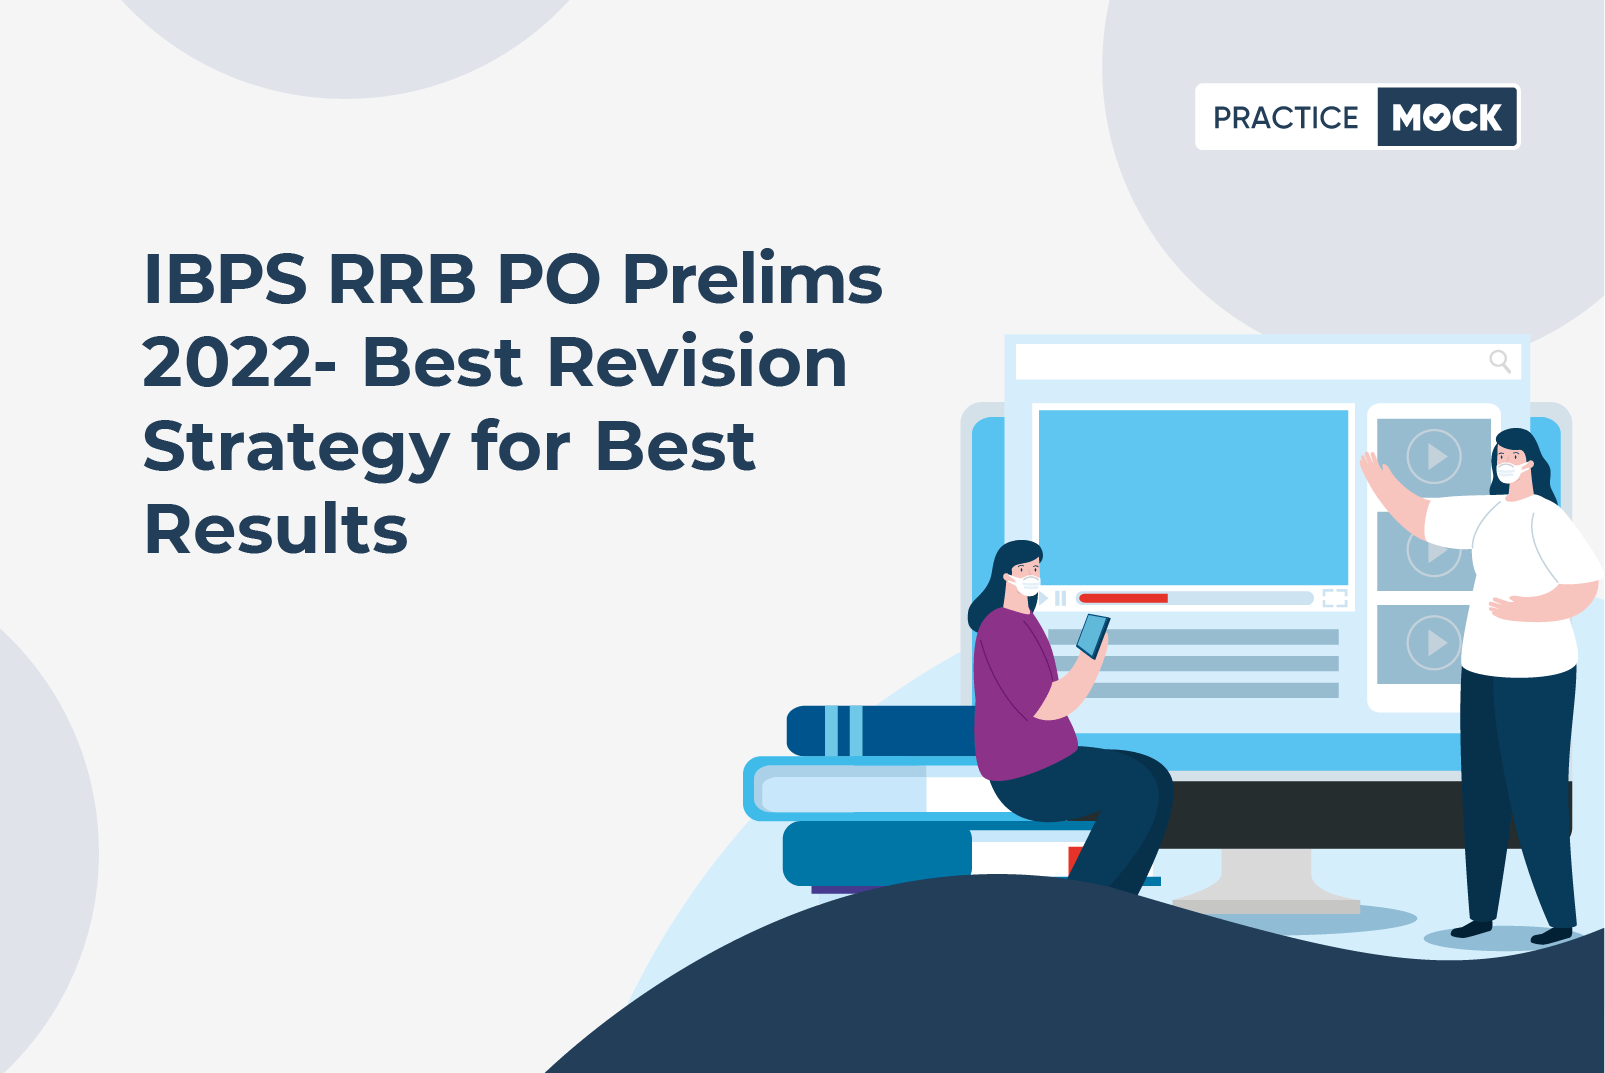 RRB PO Prelims 2022-Best Revision Strategy